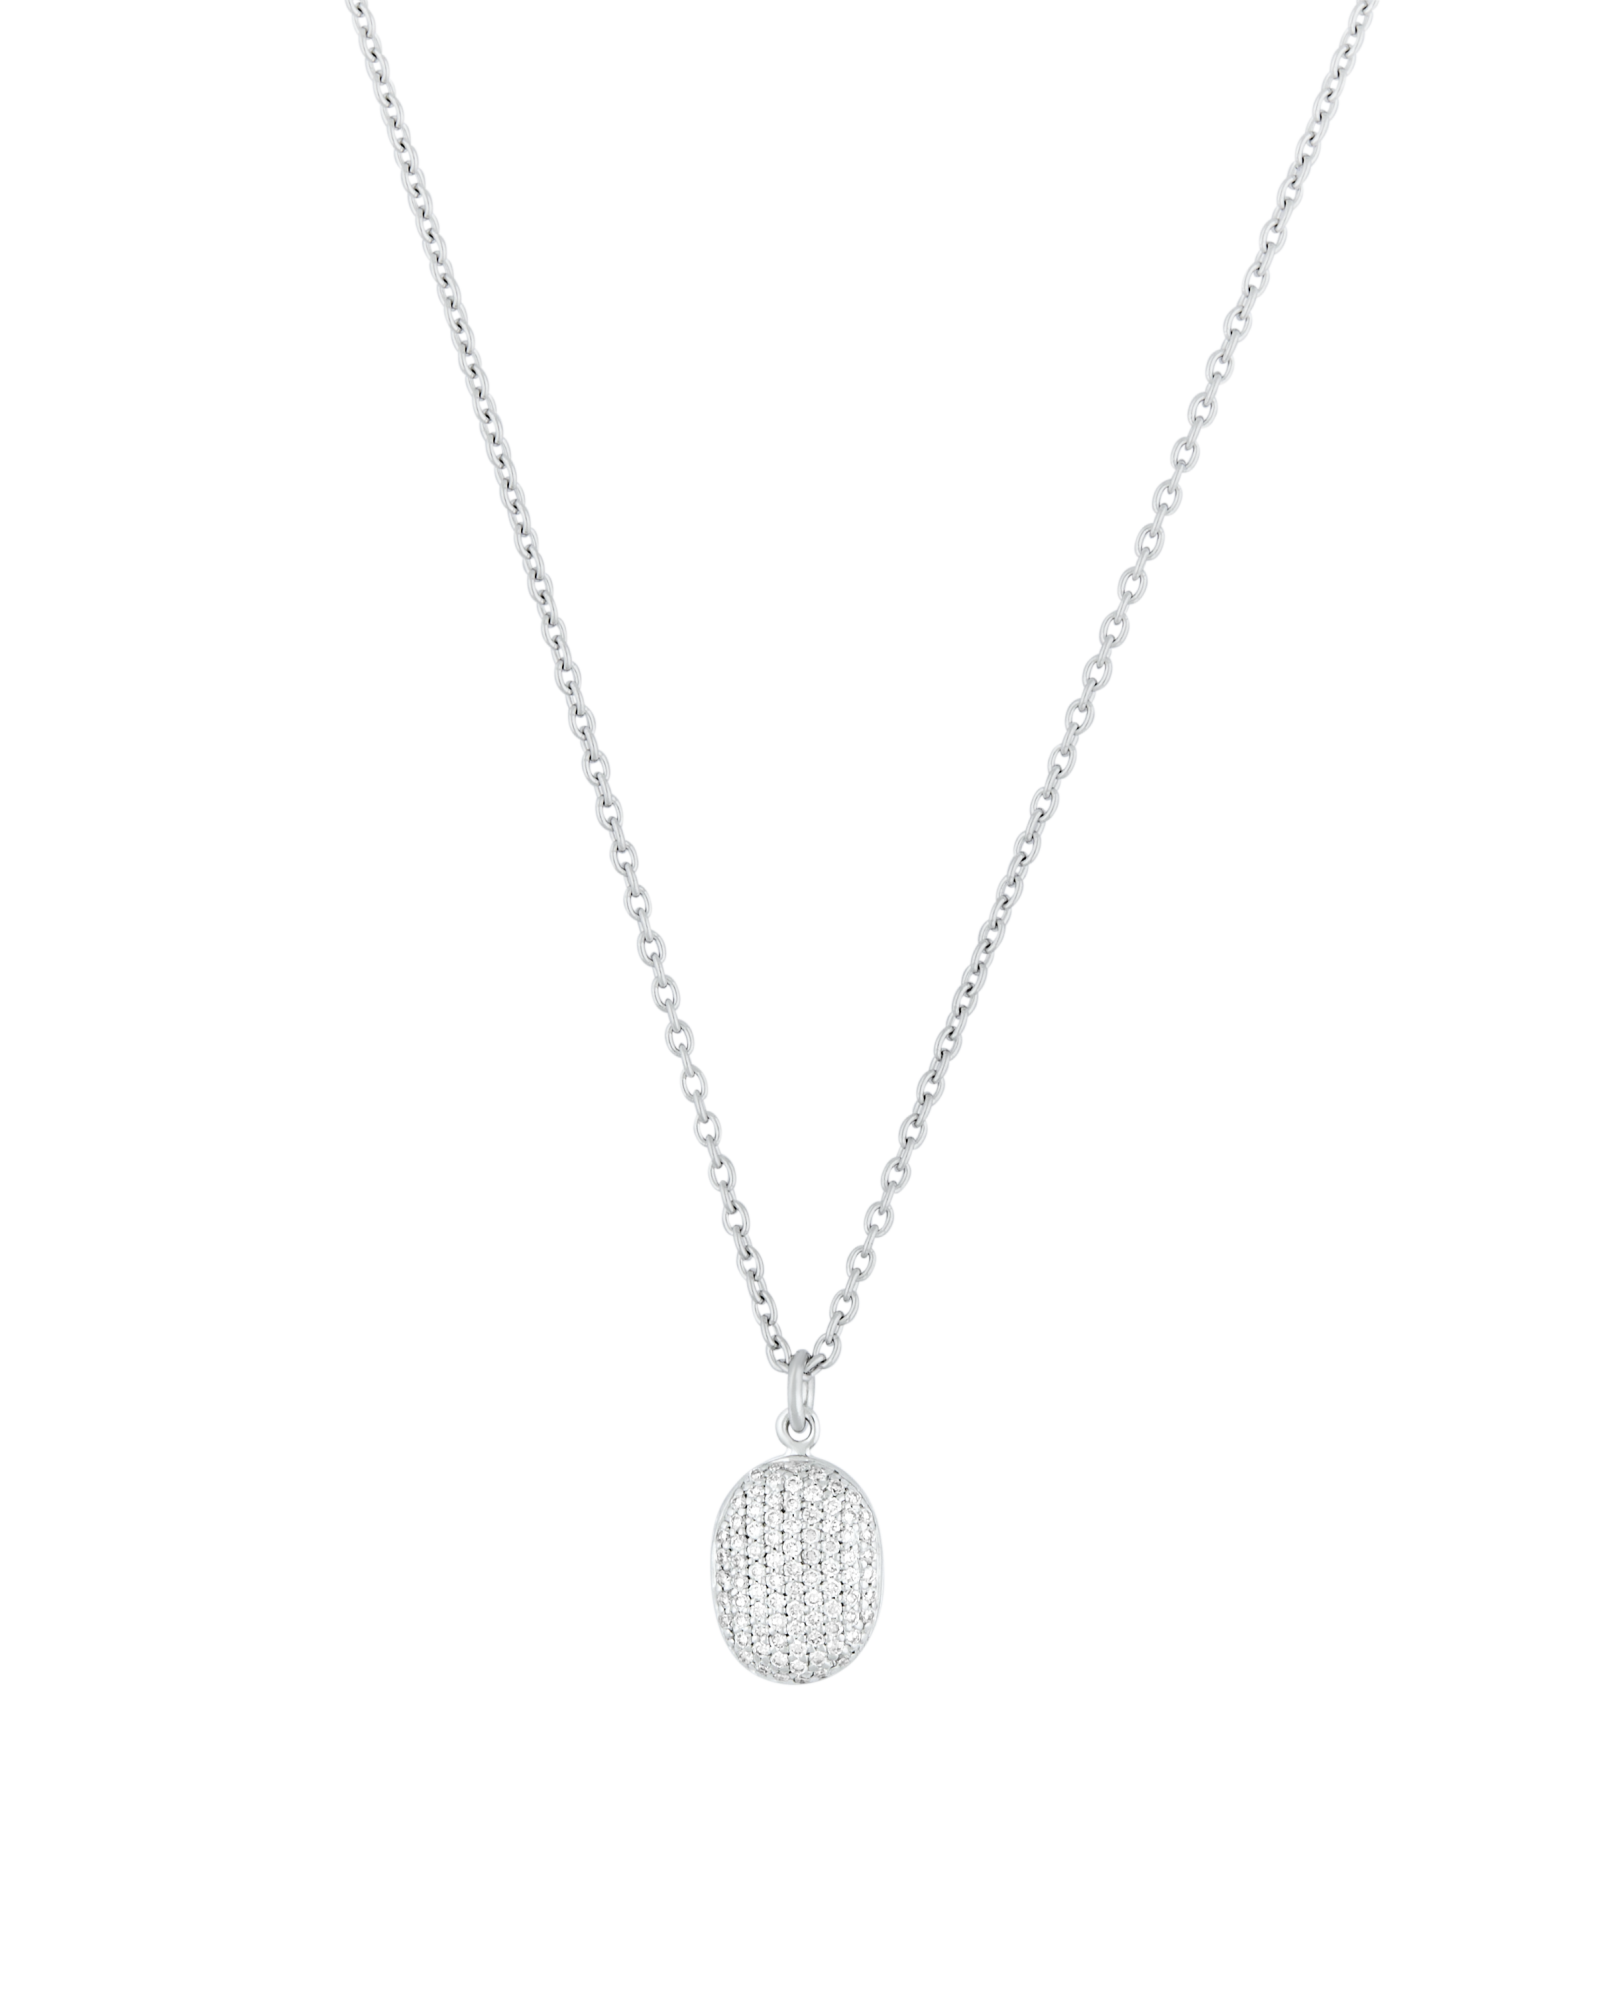 Louis Vuitton Lockit Pendant Necklace 18K White Gold and Pave